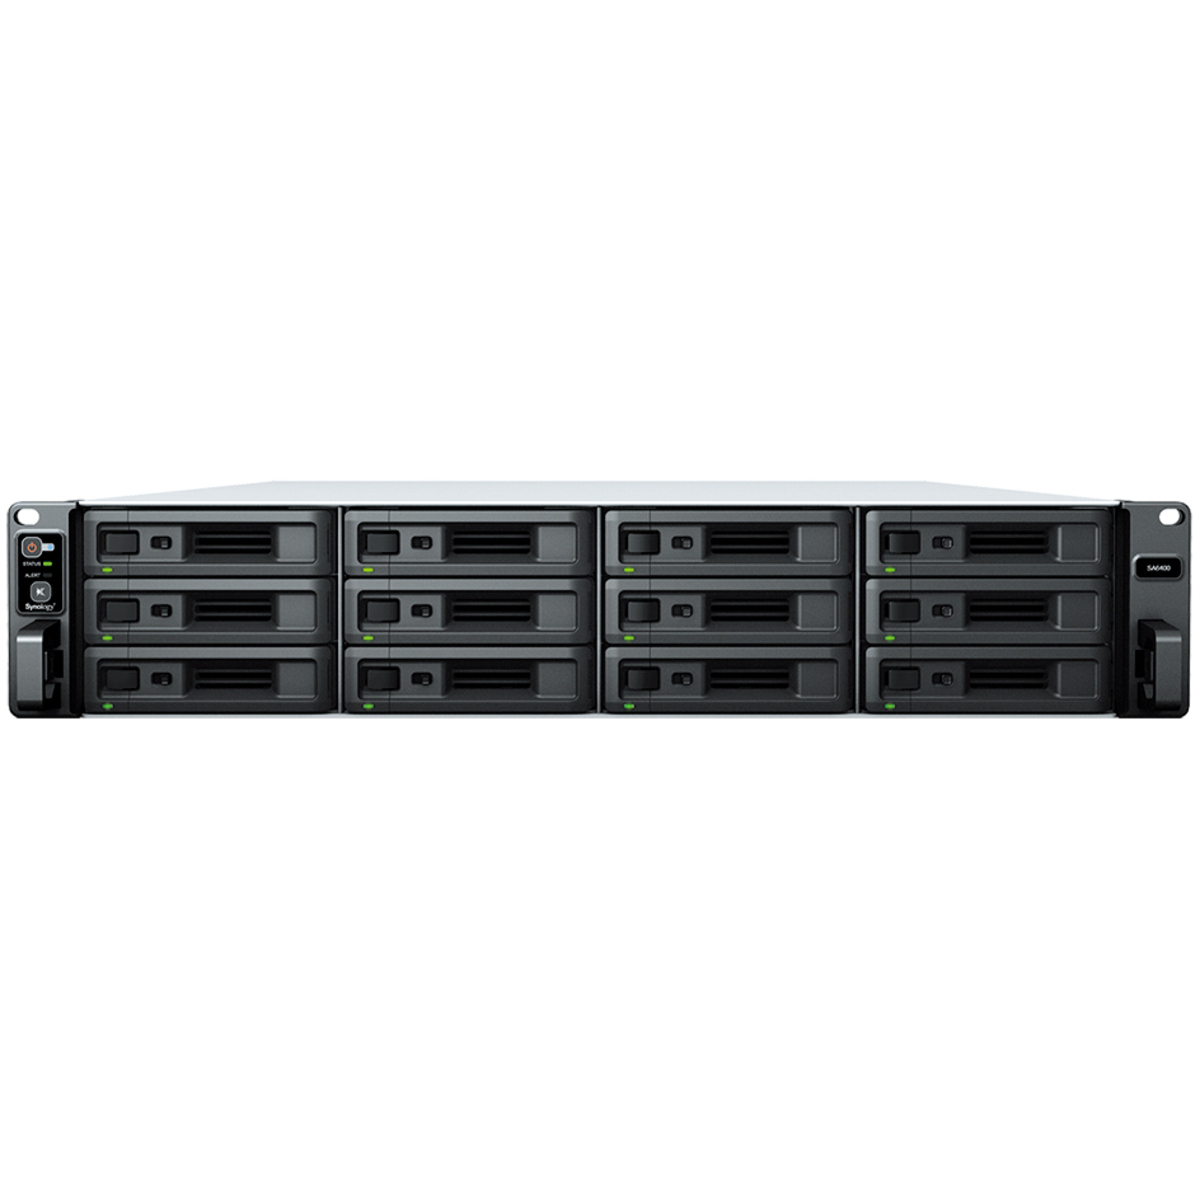 Synology RackStation SA6400 176tb 12-Bay RackMount Large Business / Enterprise NAS - Network Attached Storage Device 11x16tb Seagate IronWolf ST16000VN001 3.5 7200rpm SATA 6Gb/s HDD NAS Class Drives Installed - Burn-In Tested RackStation SA6400